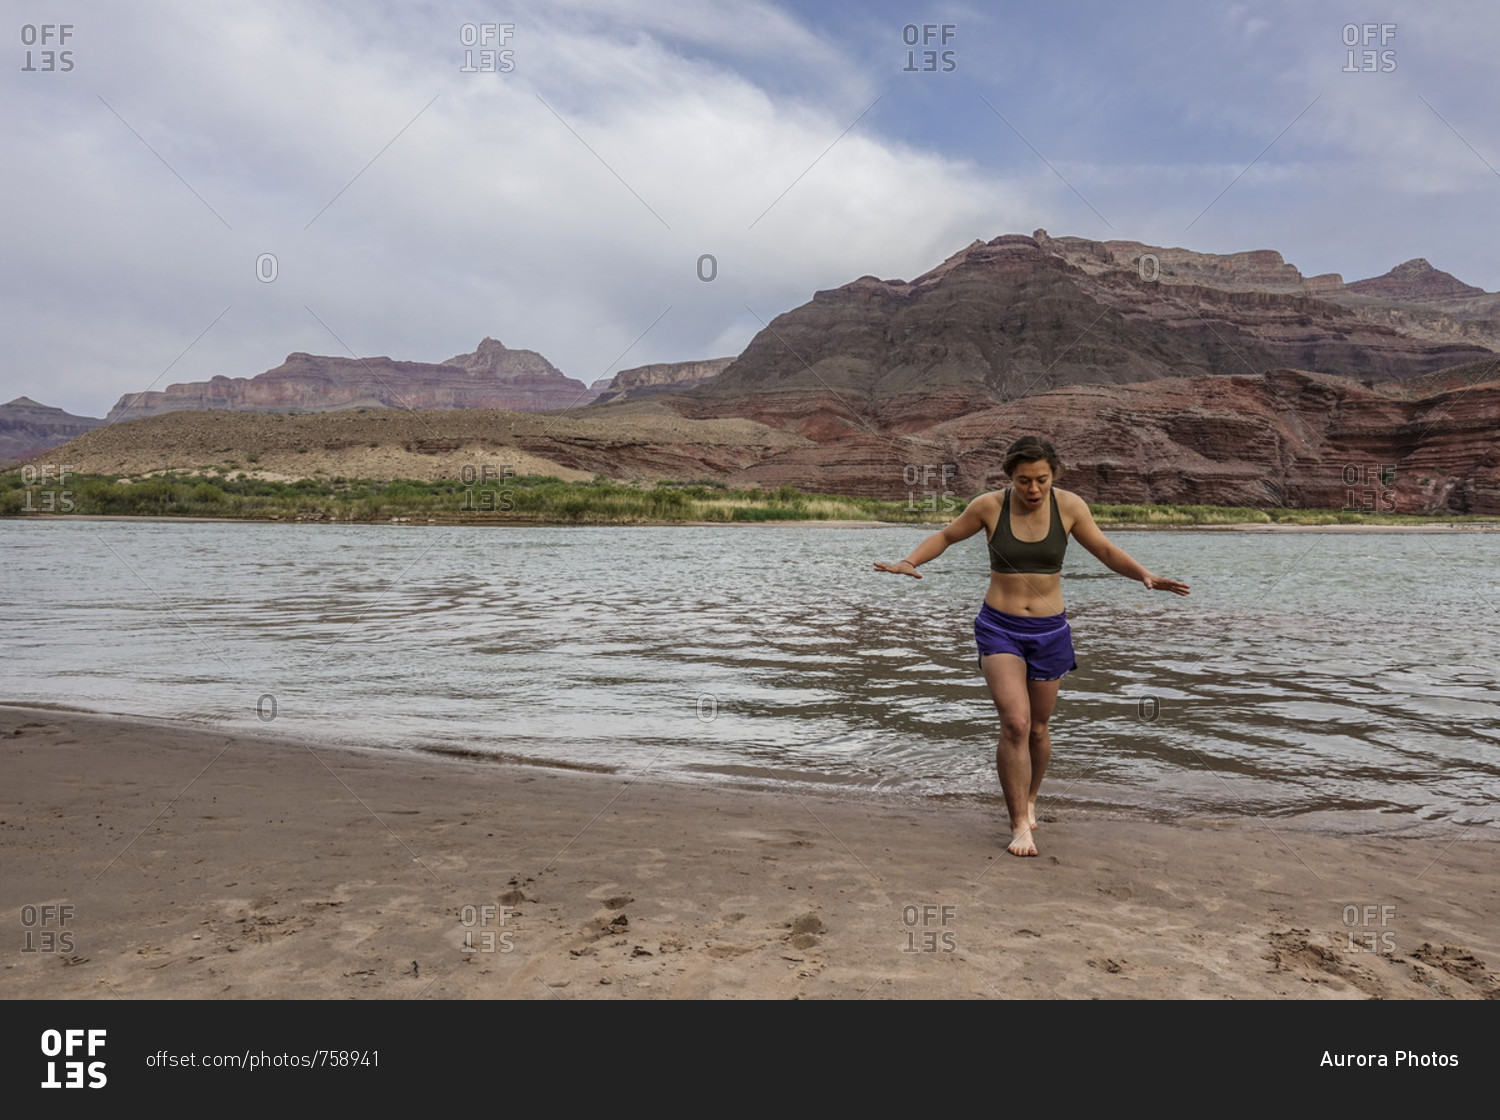 Young woman emerges from cold water of Colorado River after cooling off her feet to celebrate end of long day of hiking, Grand Canyon, Arizona, USA